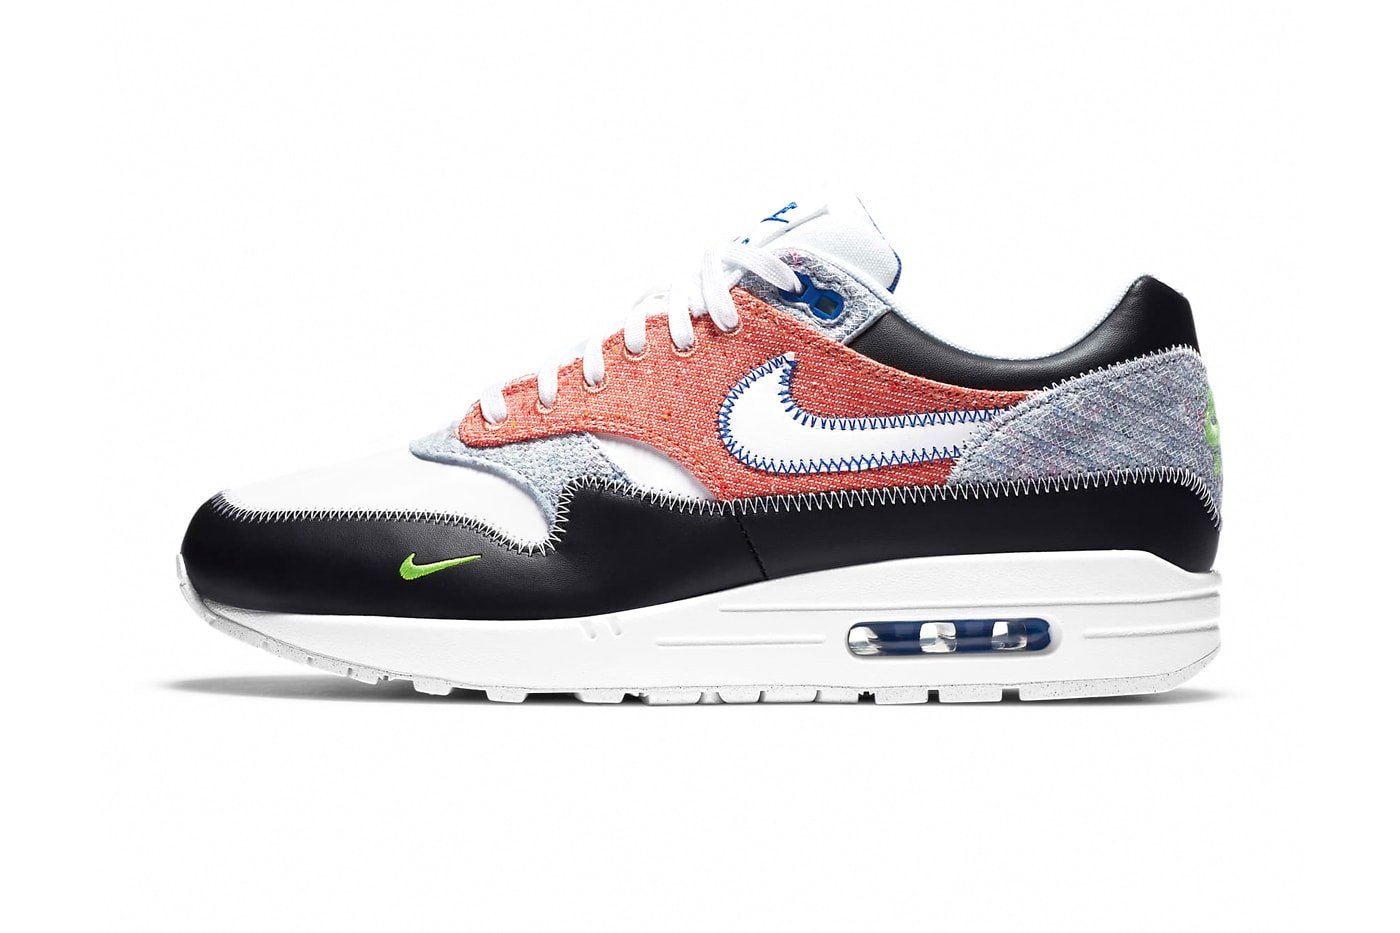 Nike Air Max 1 Game Royal White Black Electric Green CT1643 100 release menswear streetwear shoes sneakers footwear kicks trainers runners fw20 fall winter 2020 collection